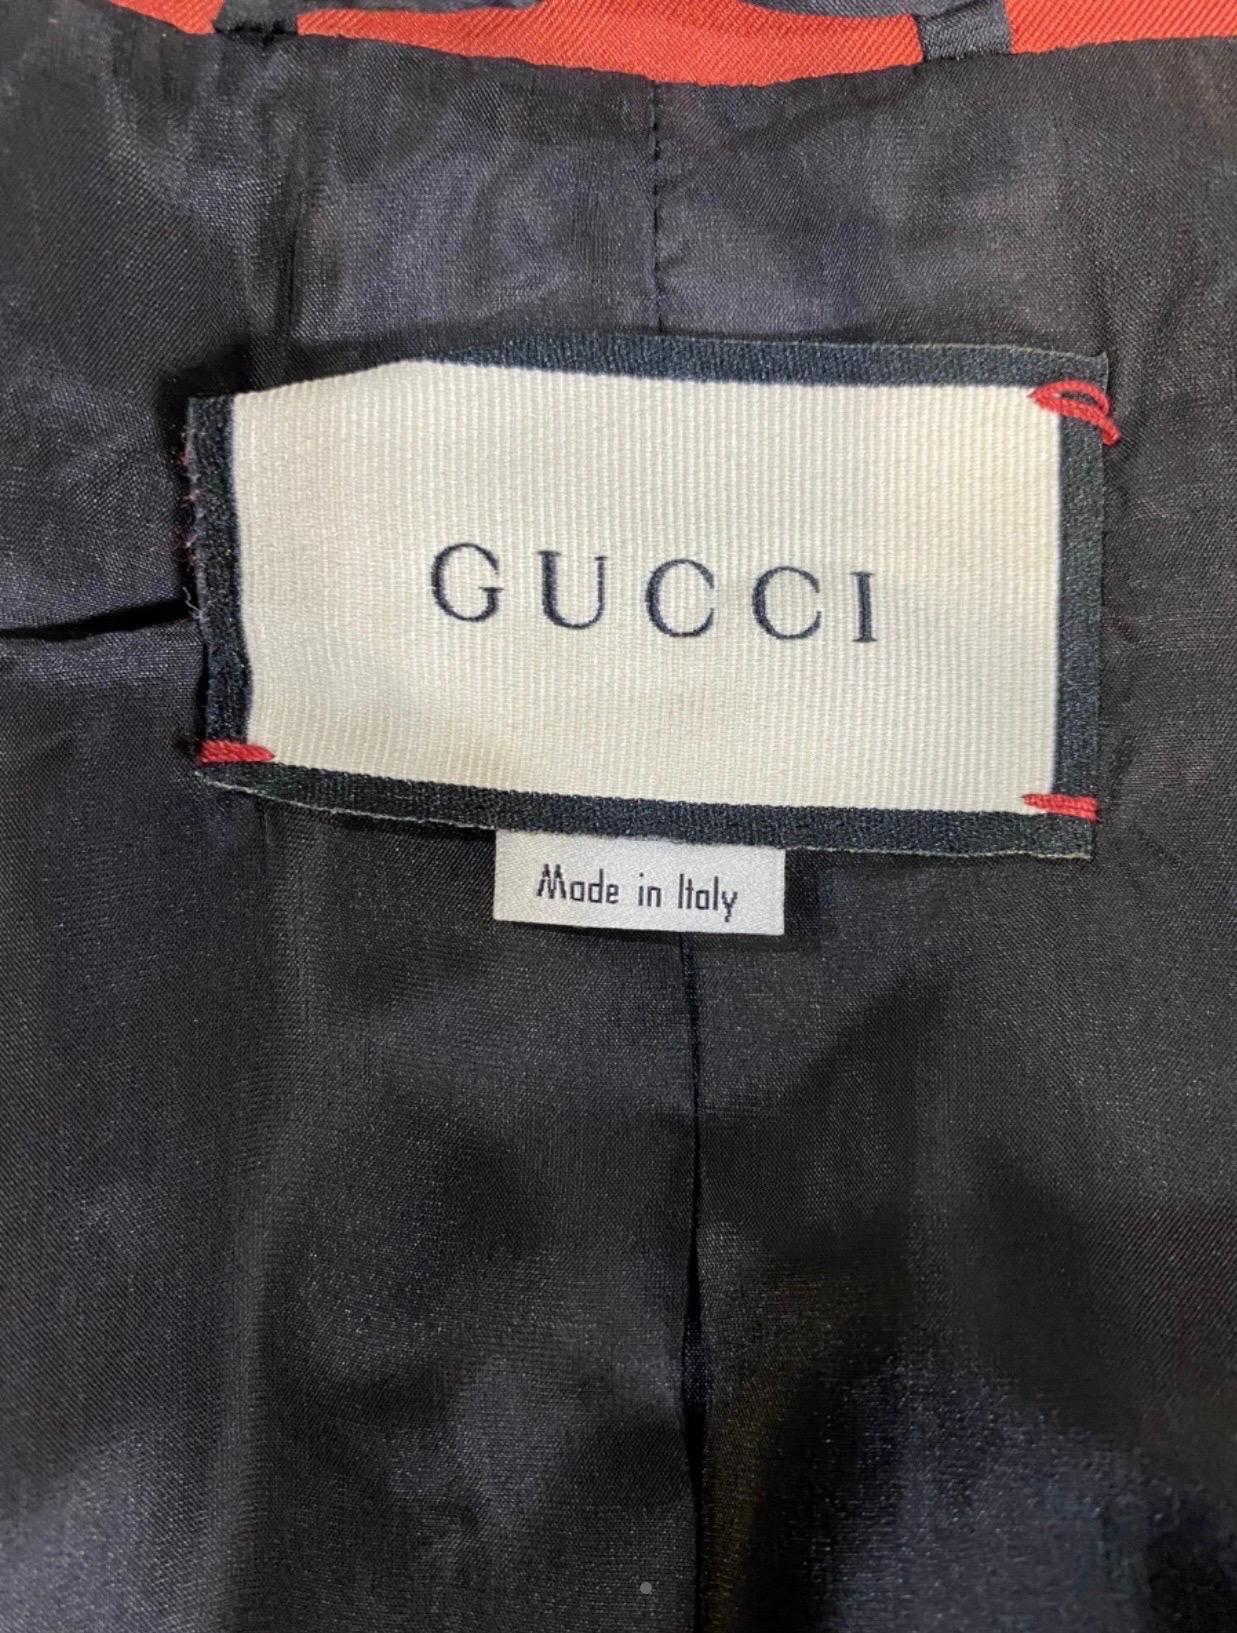 Gucci red roses Jacket 1